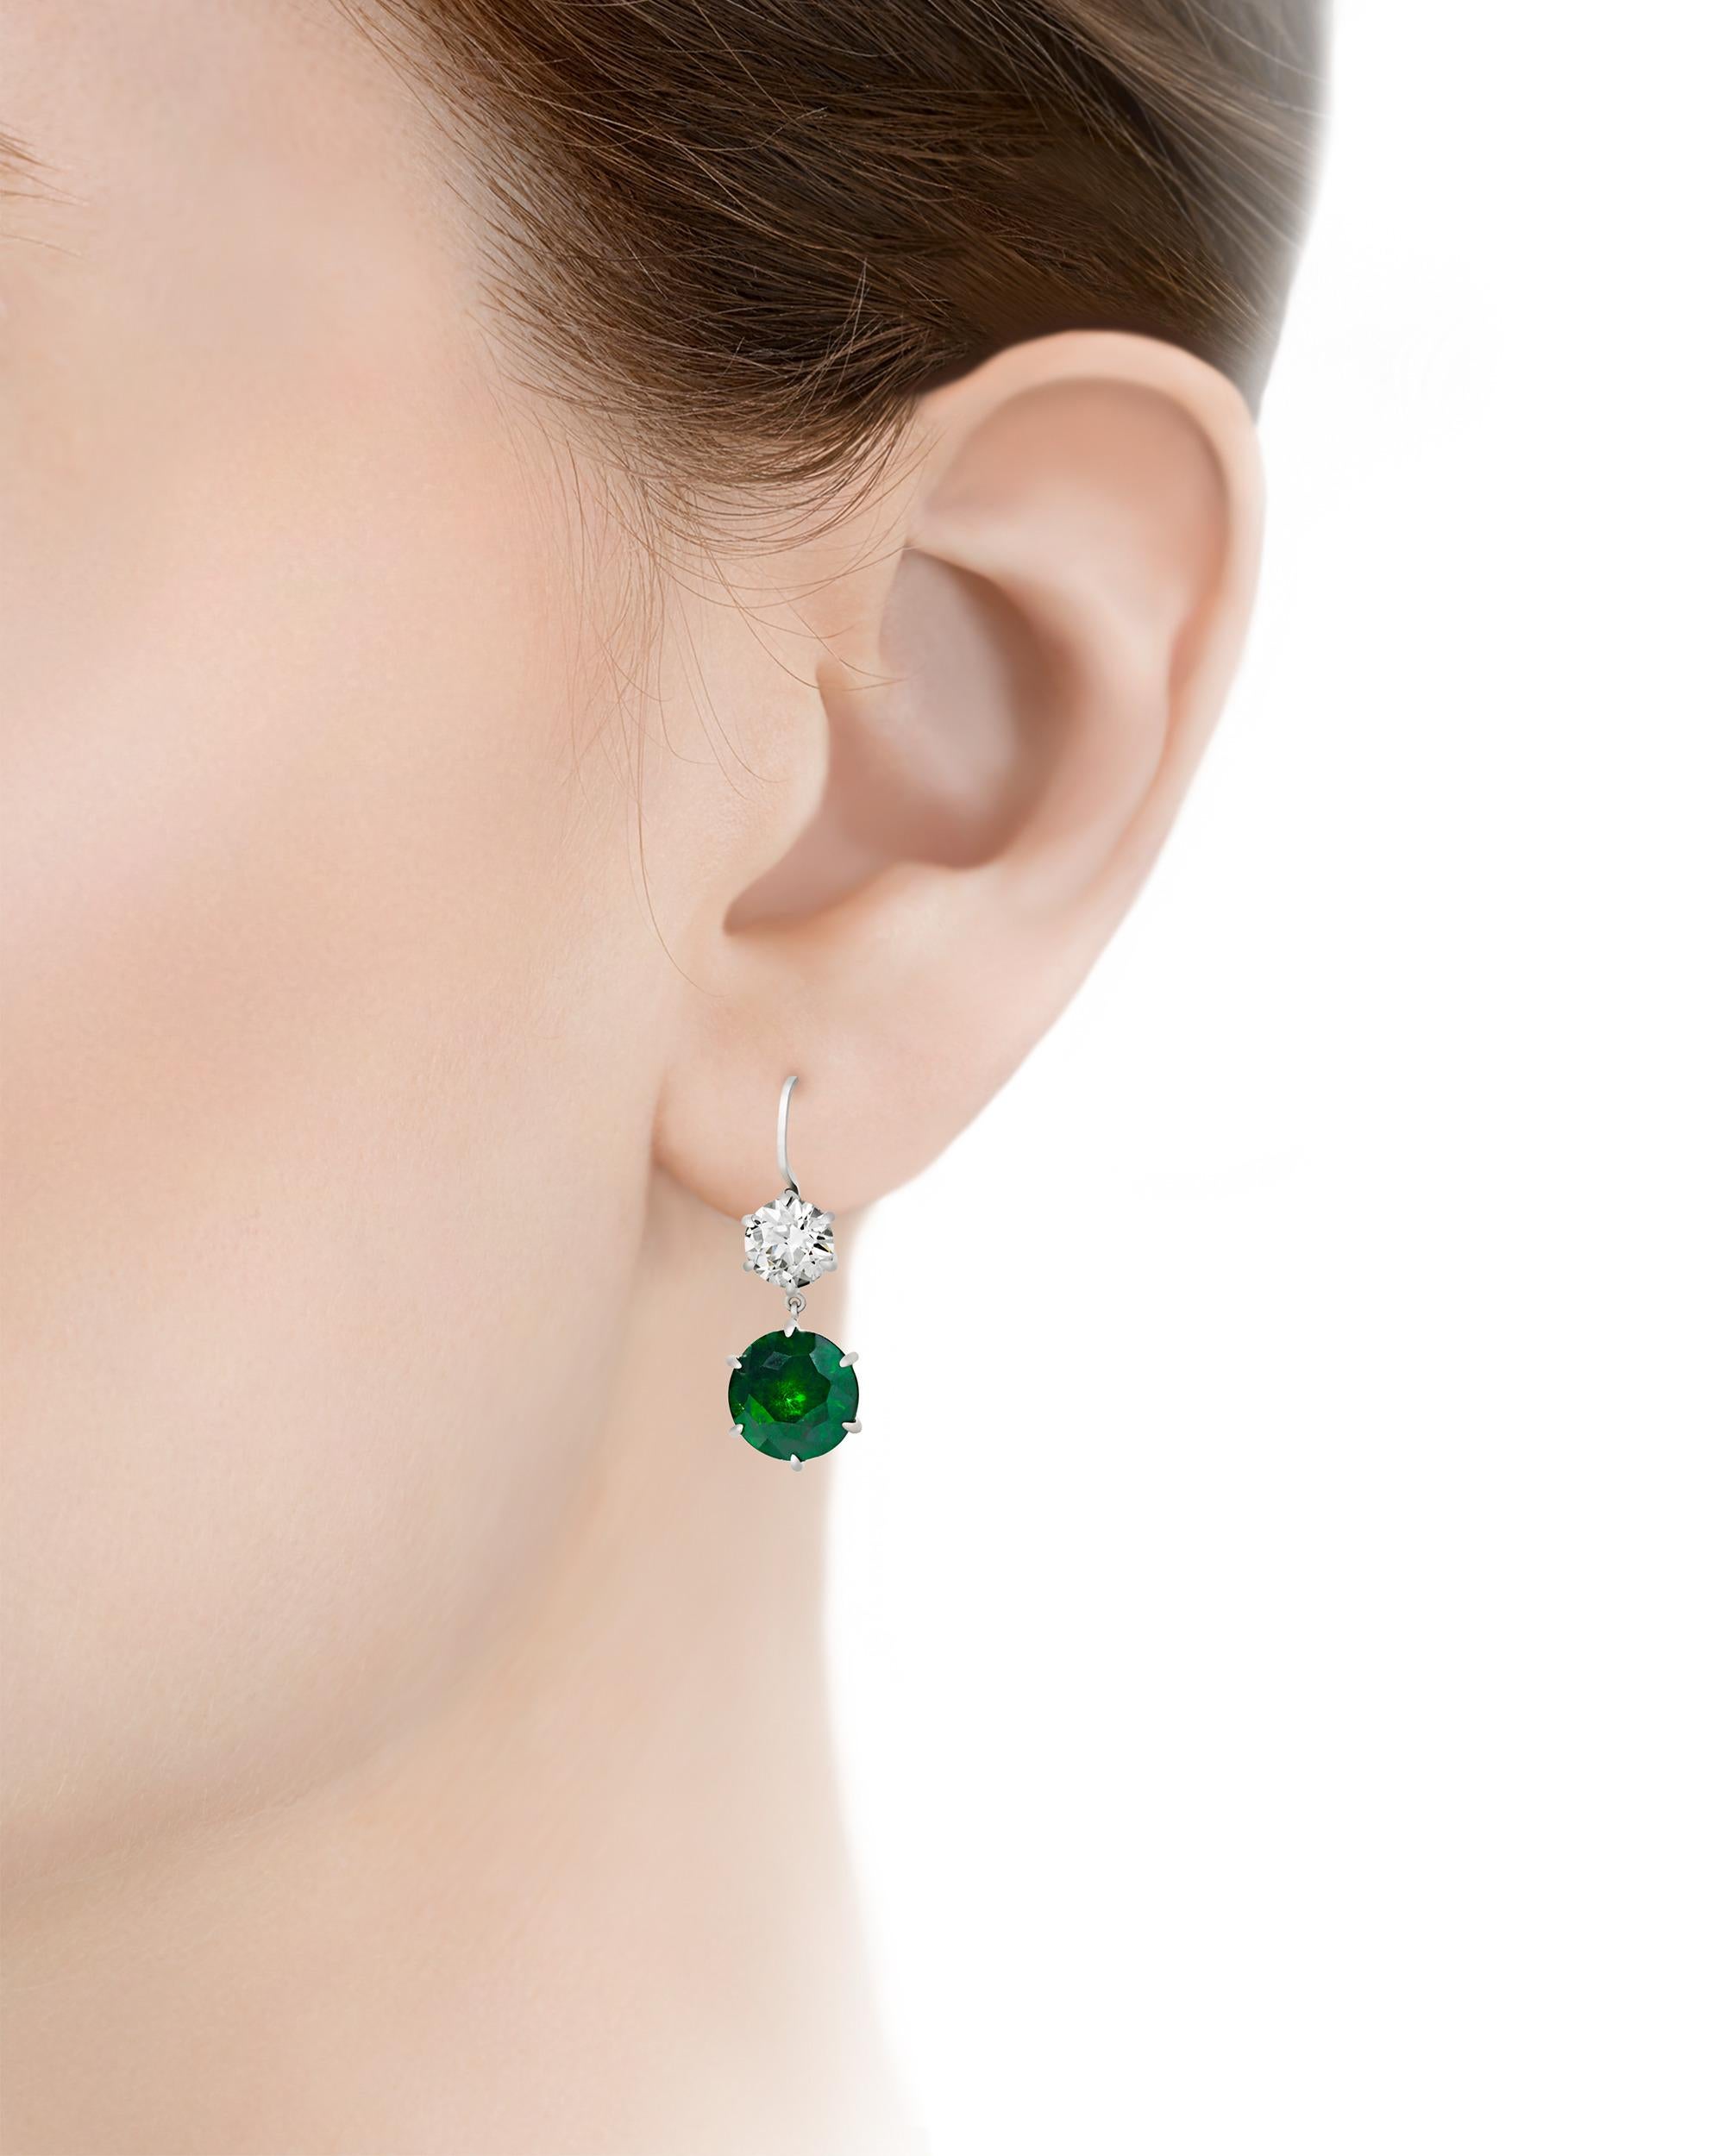 The demantoid garnet is among the rarest varieties of this coveted gemstone, and the examples in these earrings display a particularly vivid, luminous green hue. Presented by famed jeweler Raymond Yard in a classic platinum setting, the round